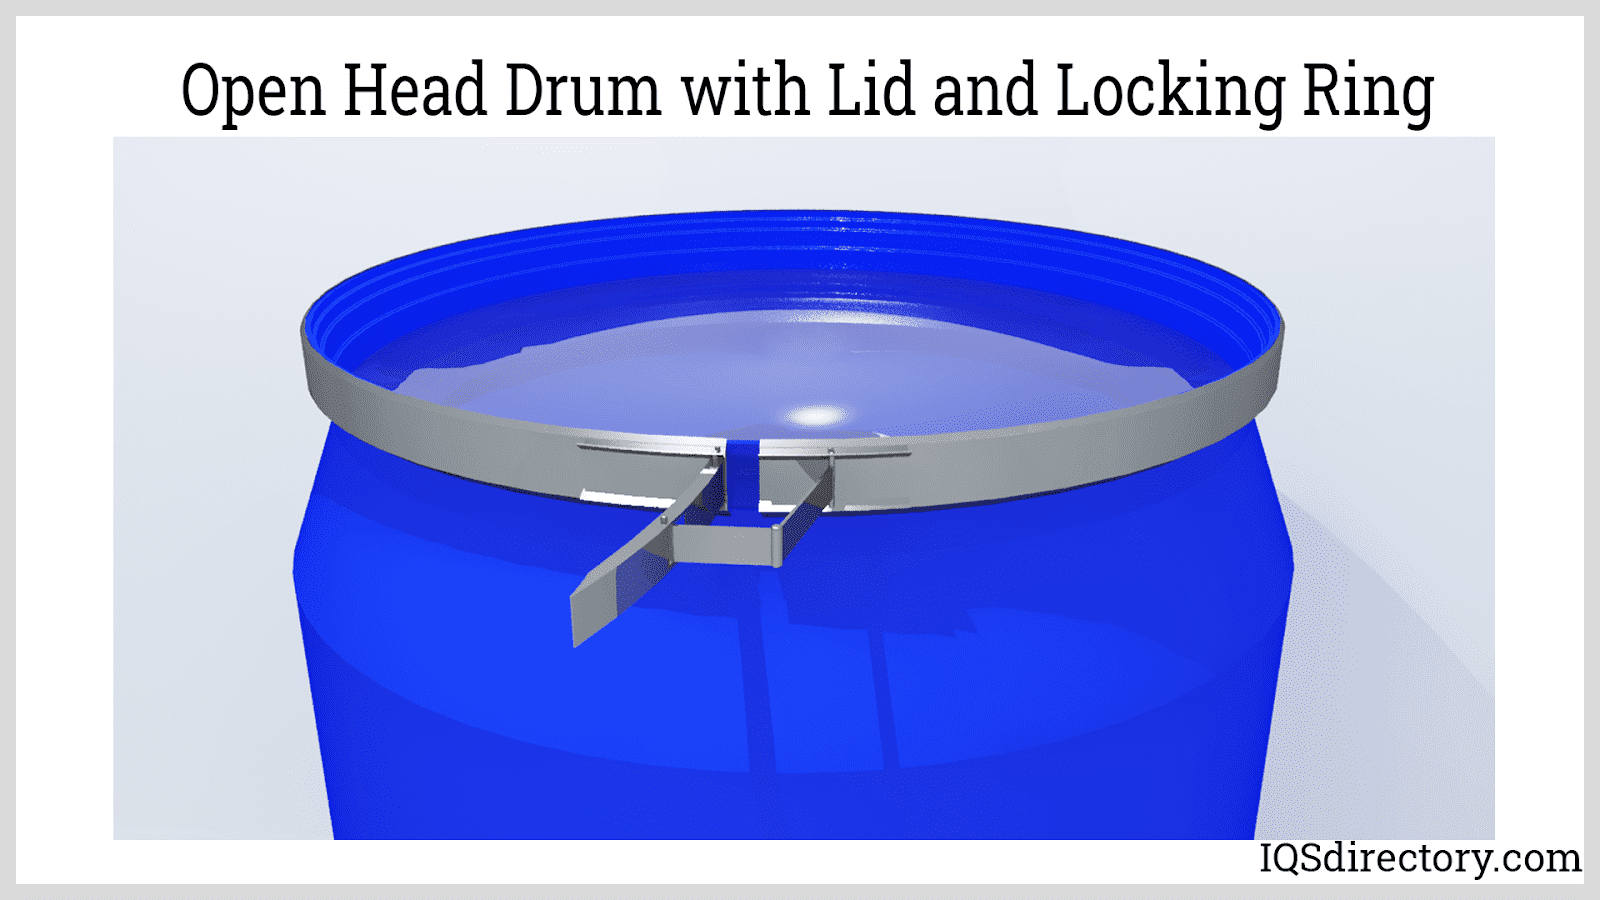 Open Head Drum with Lid and Locking Ring